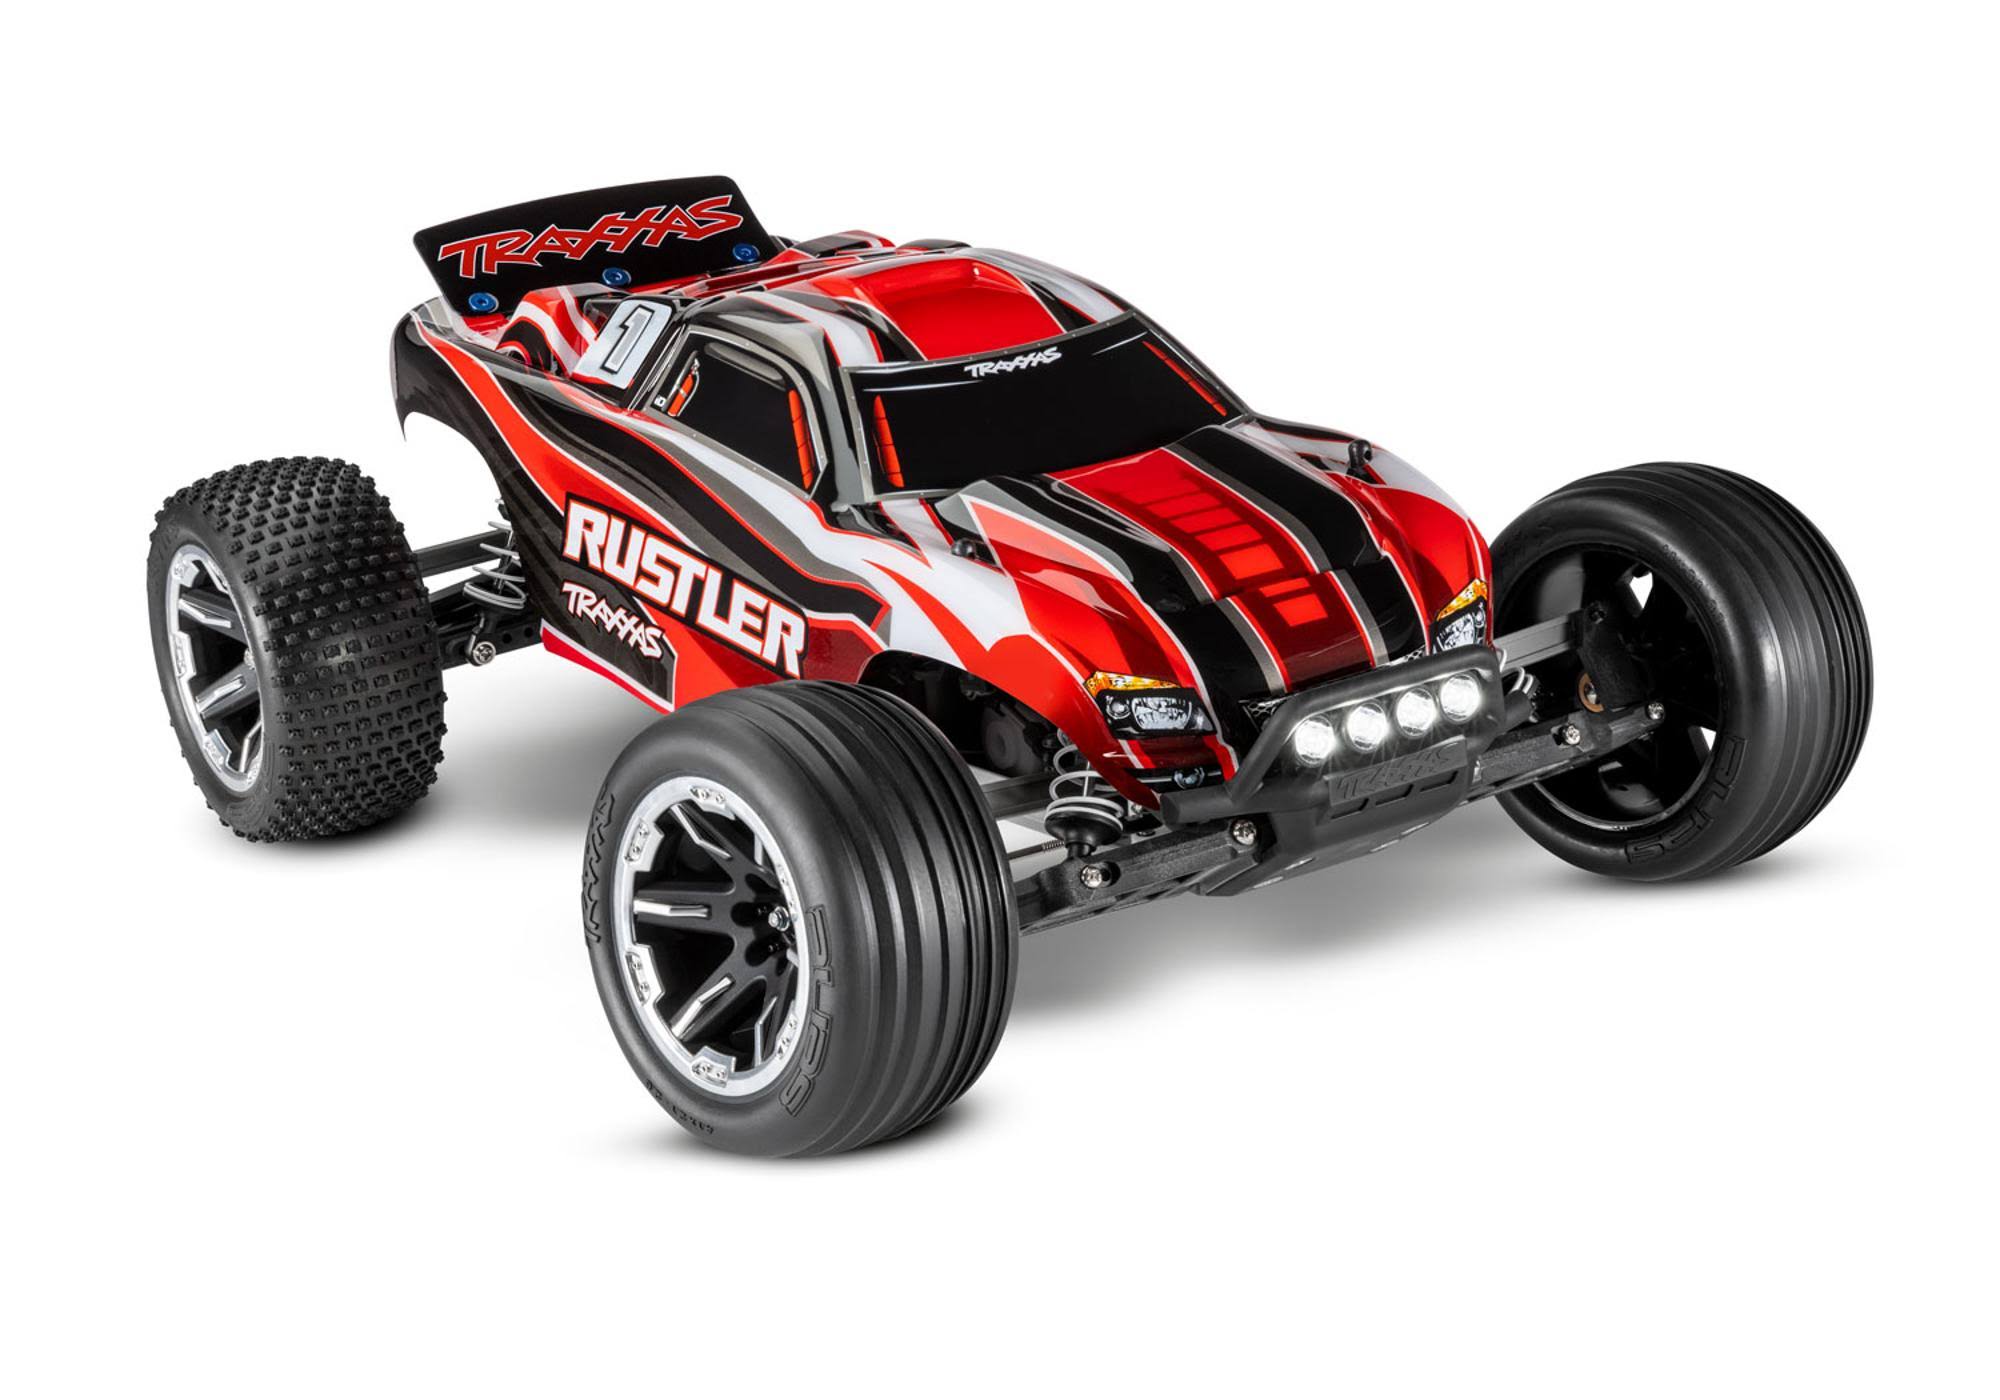 Traxxas Rustler 2WD 1/10 Stadium Truck RTR TQ - LED - with Battery & Charger (Red/Black)